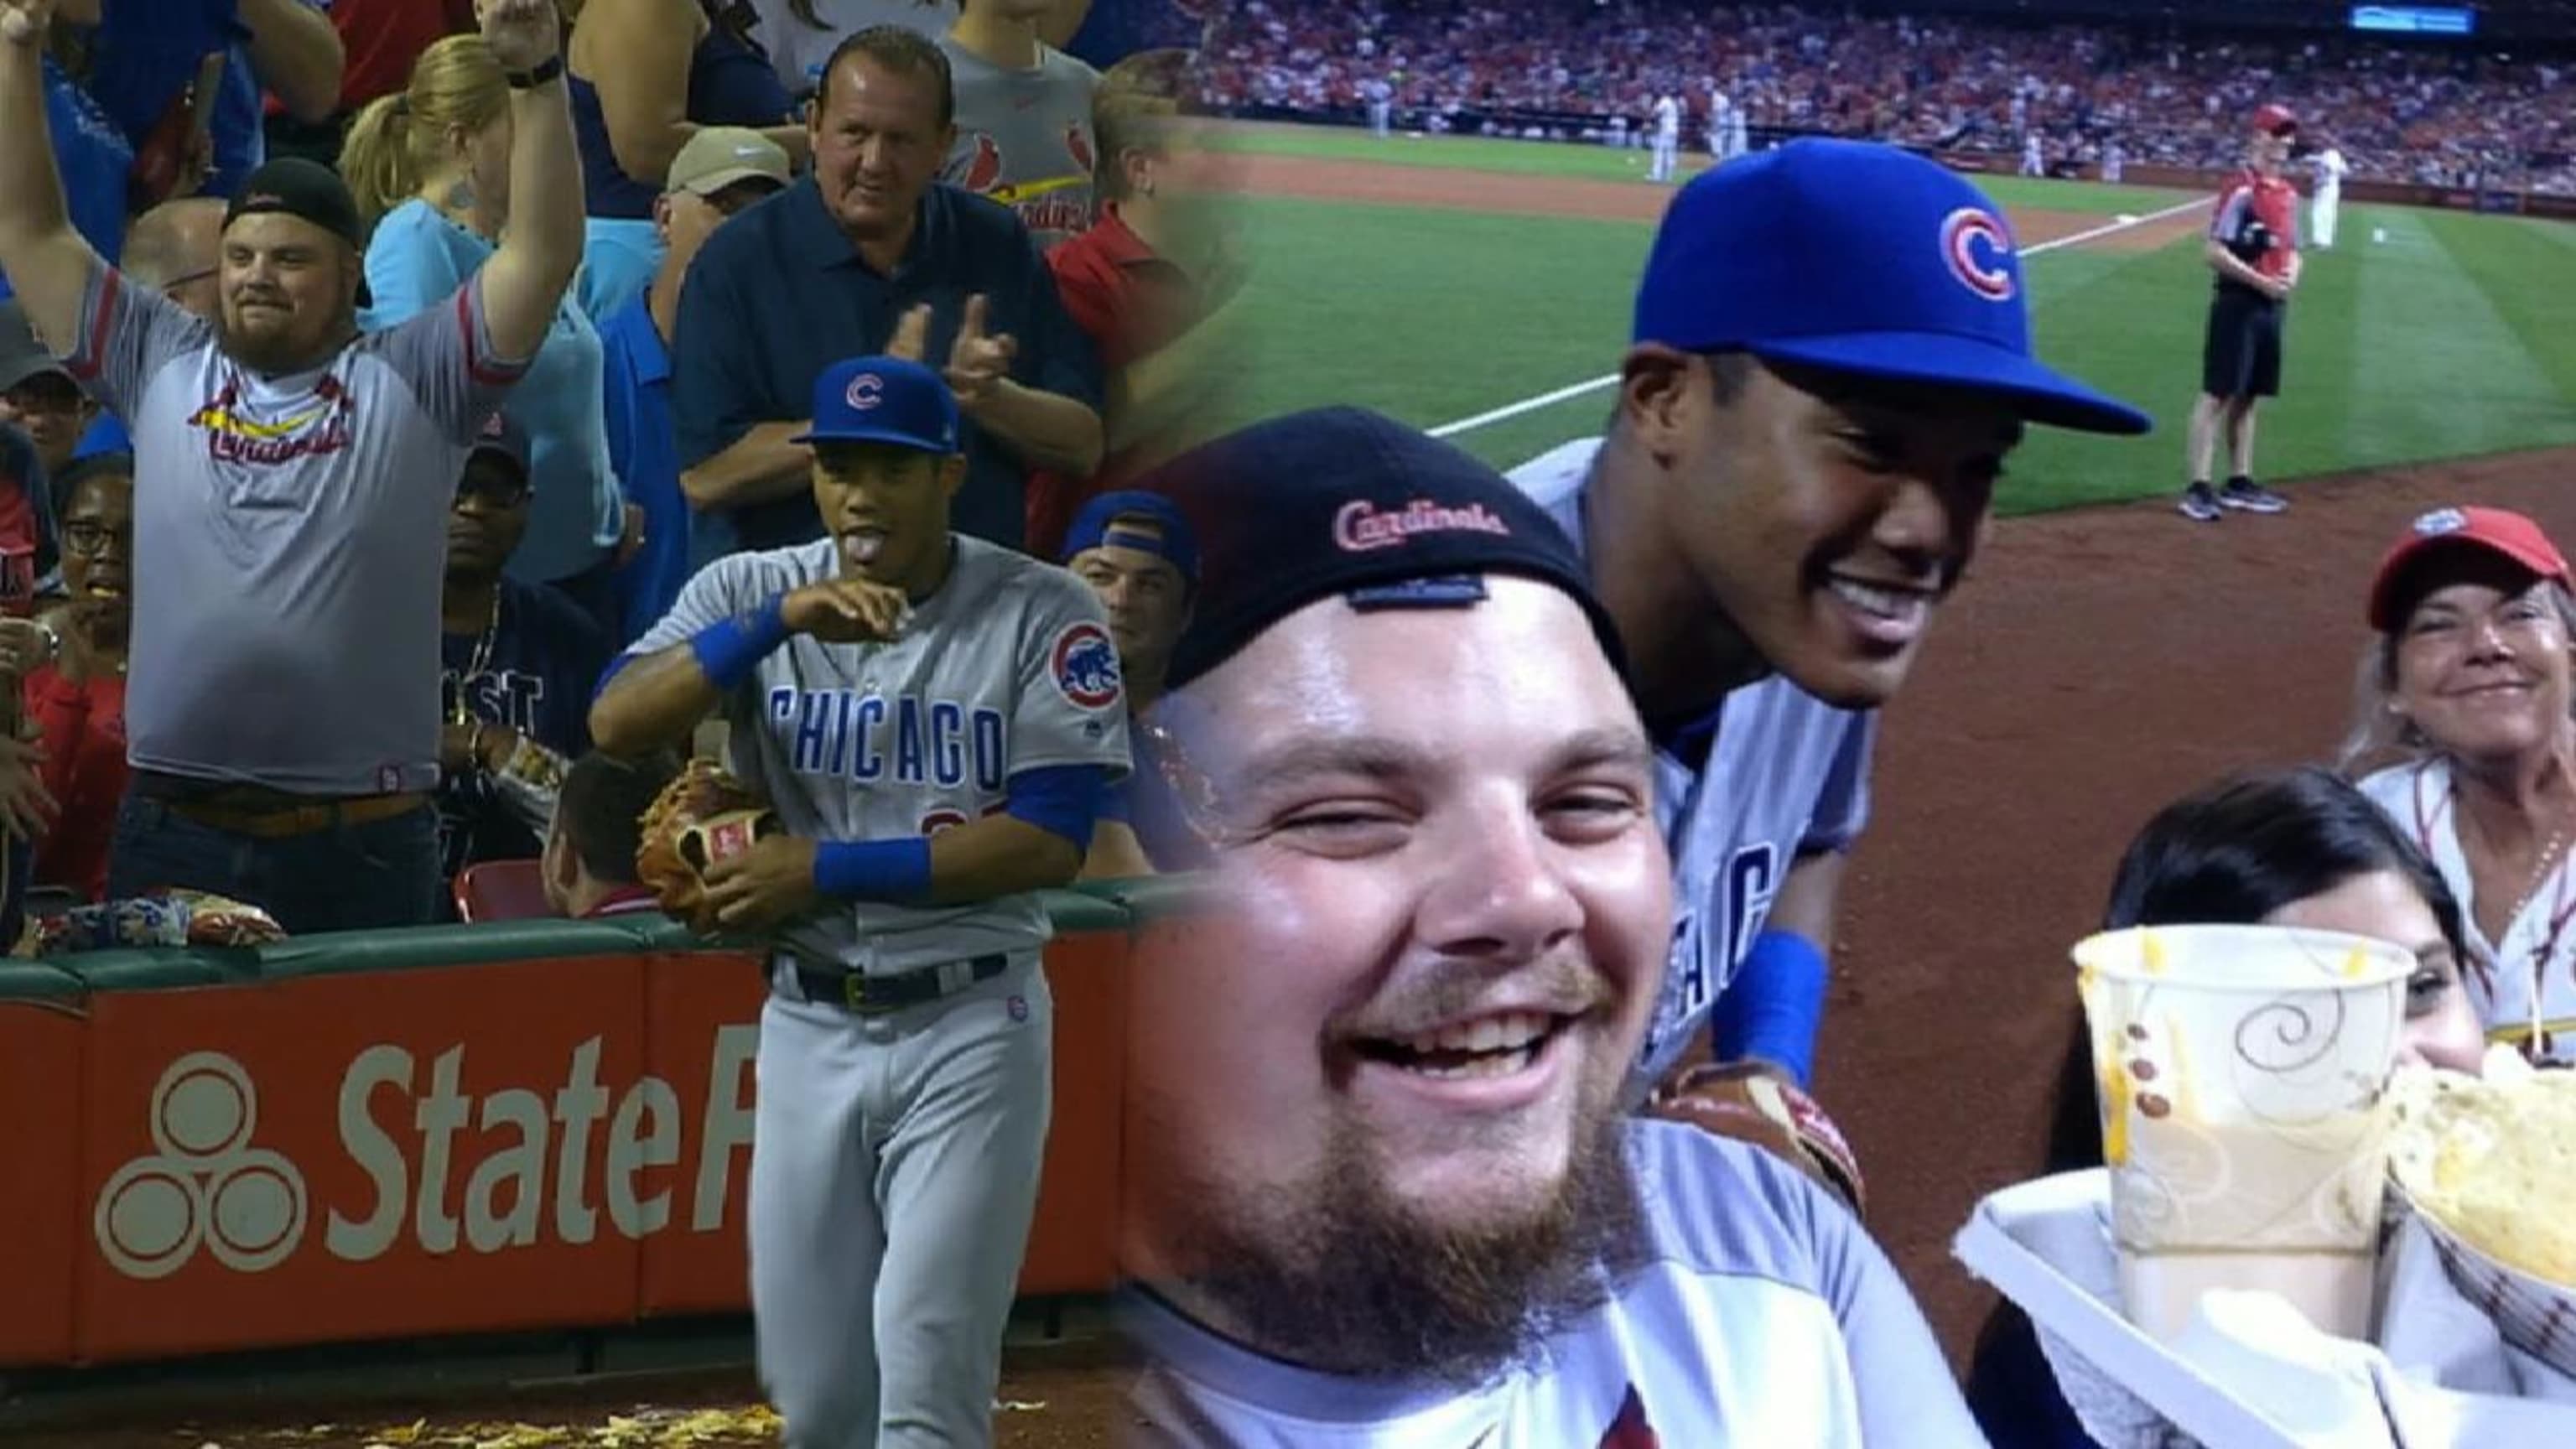 Addison Russell kindly replaced a fan's nachos after a foul ball